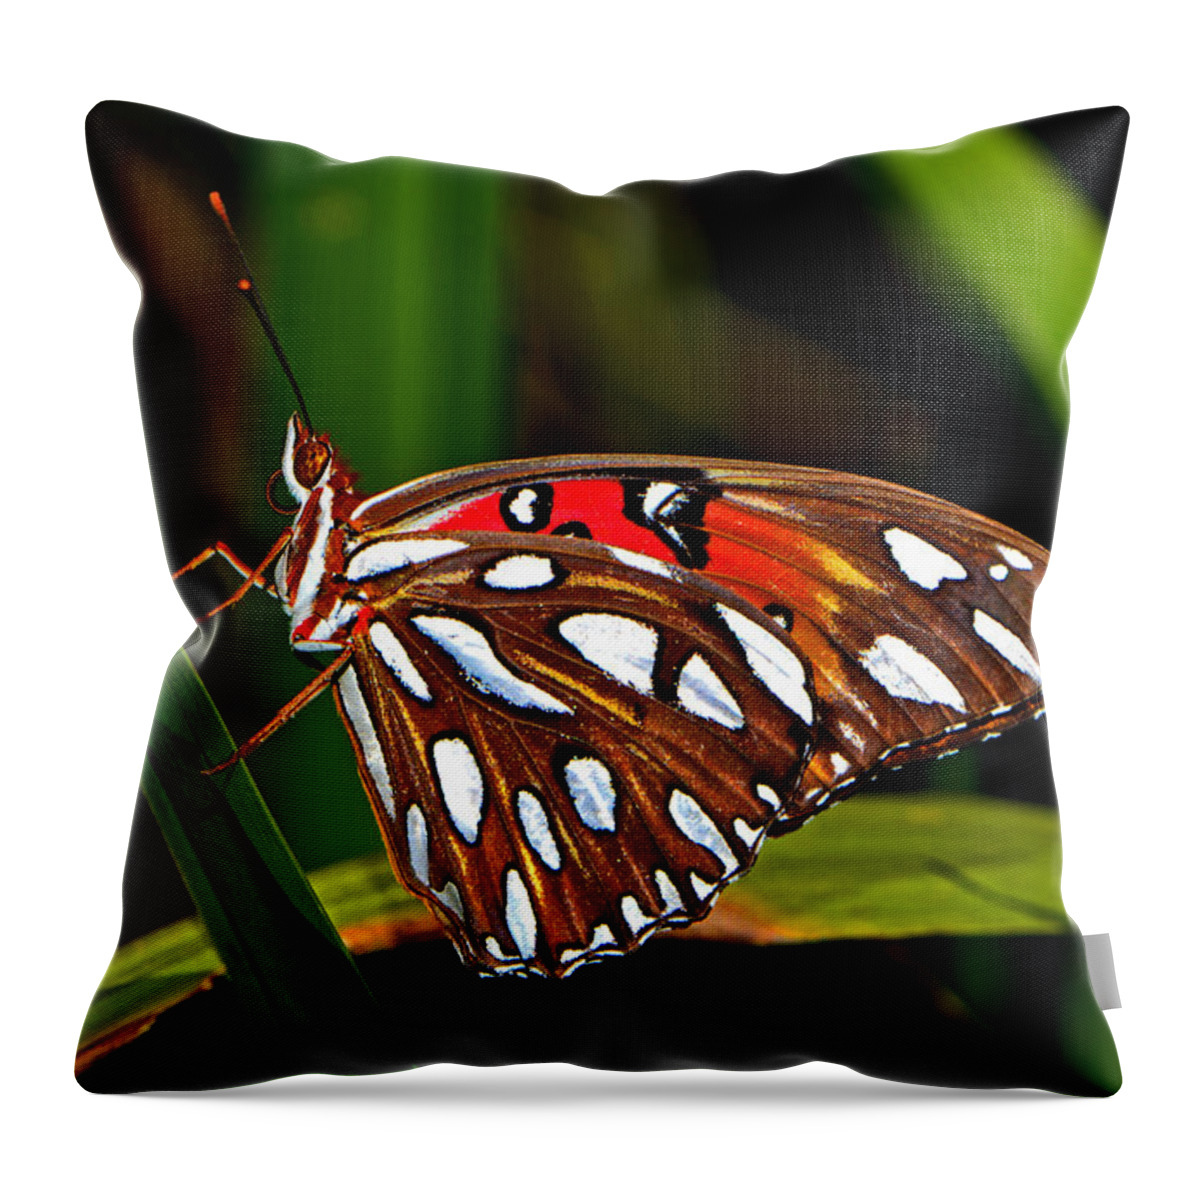 Macro Throw Pillow featuring the photograph Colors Of Nature - Natures Tapestry by George Bostian